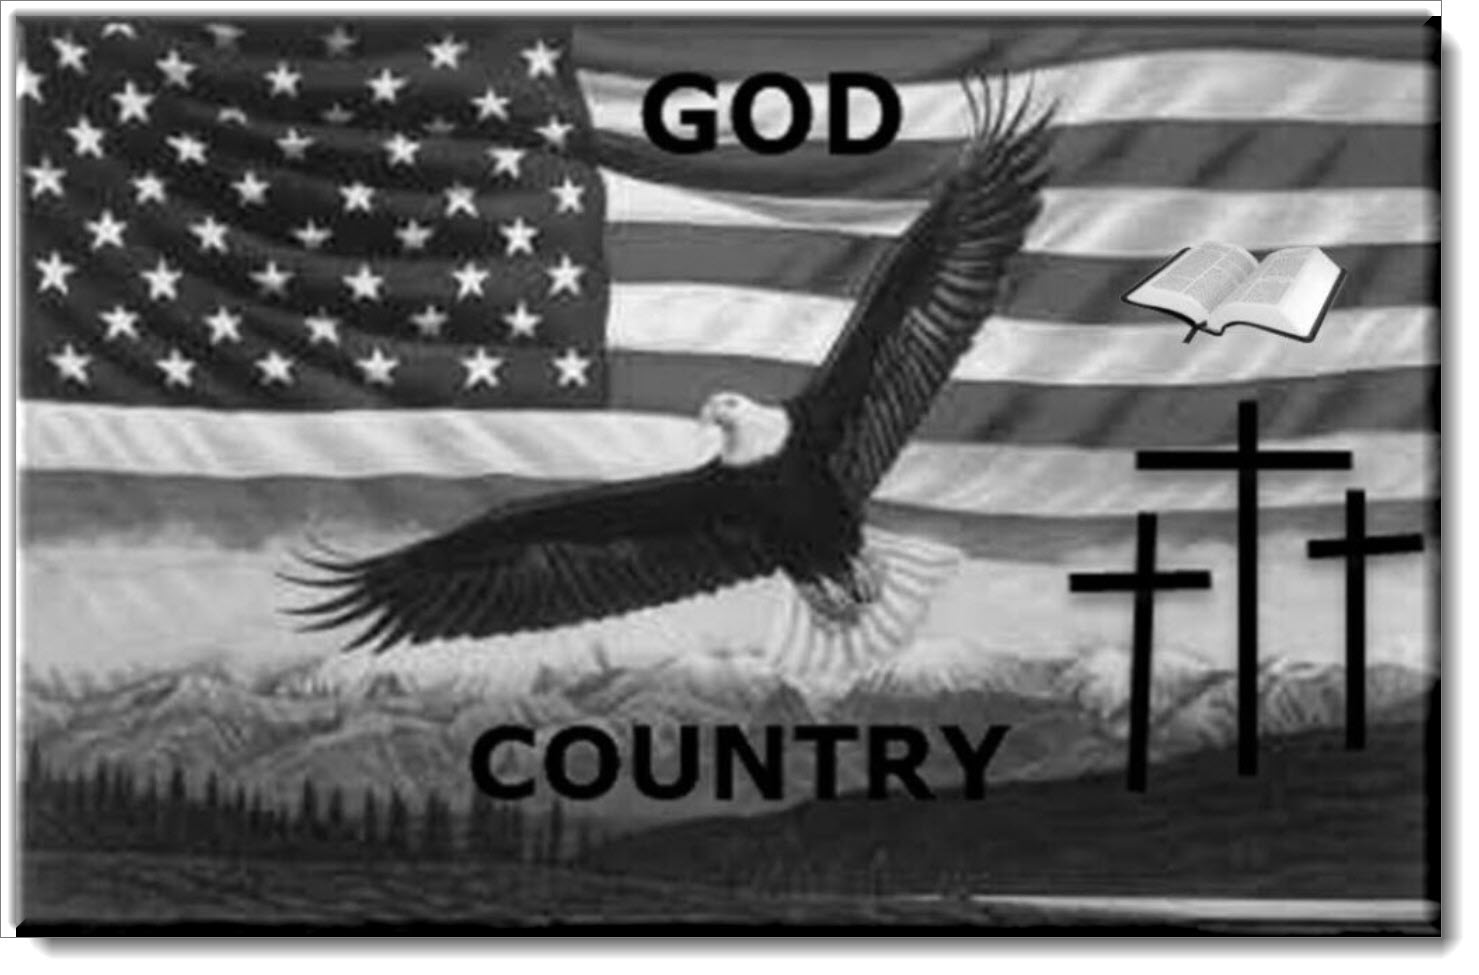 A Freedom God, The Bible, Country under Attack